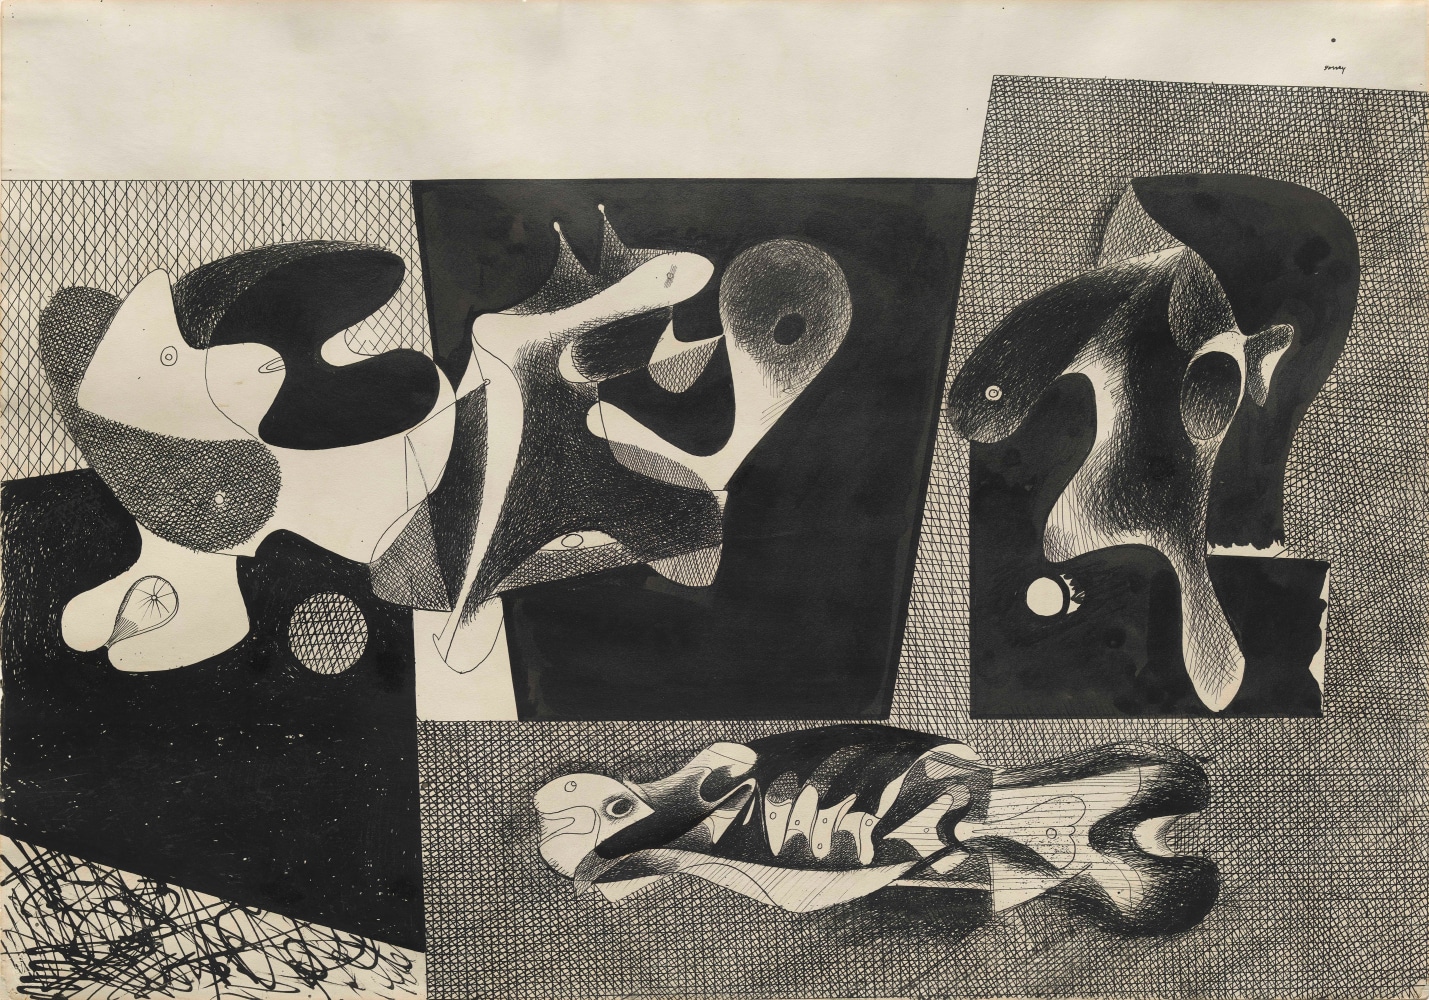 Abstract composition with arabesque shapes, geometric head, and an écorché of a fish set on a heavily cross-hatched background